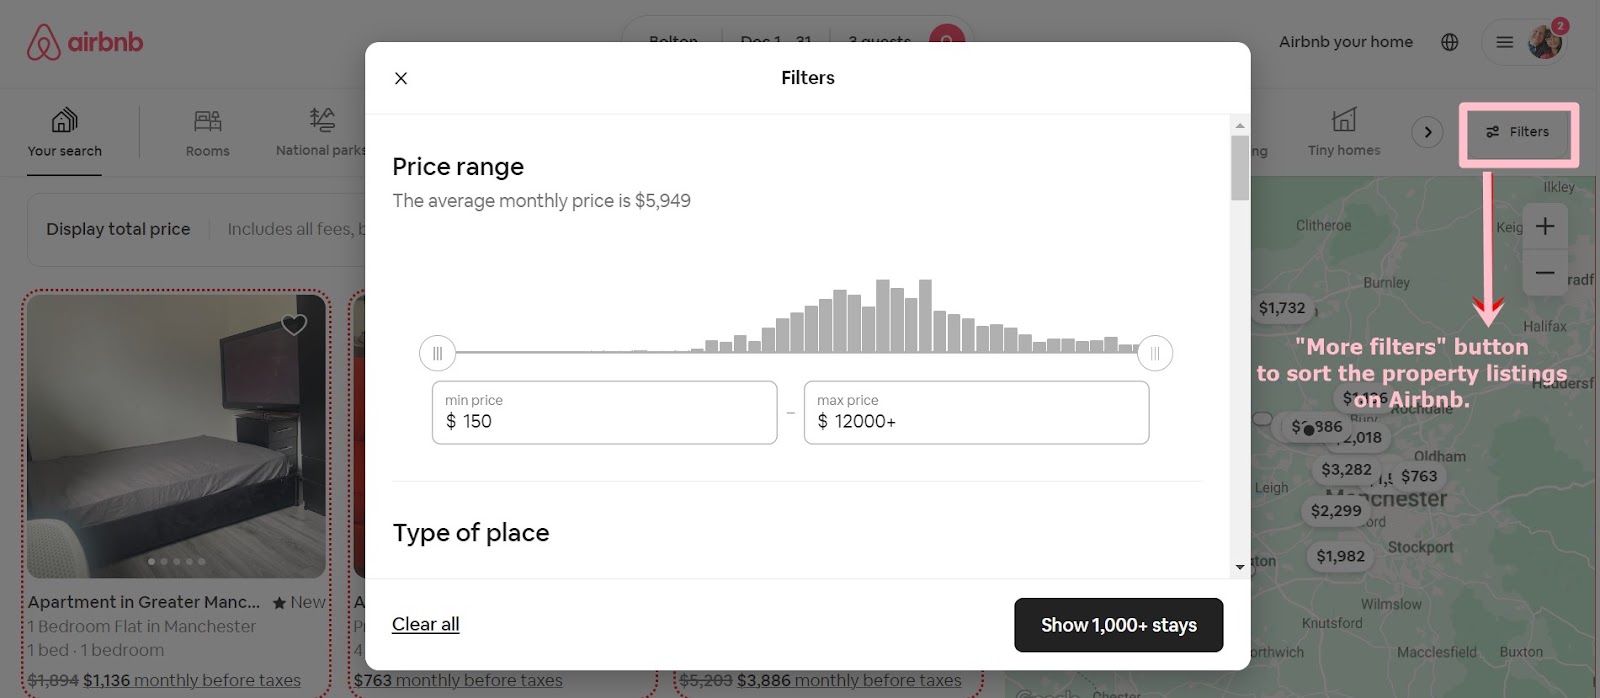 price range filter on airbnb for family travel